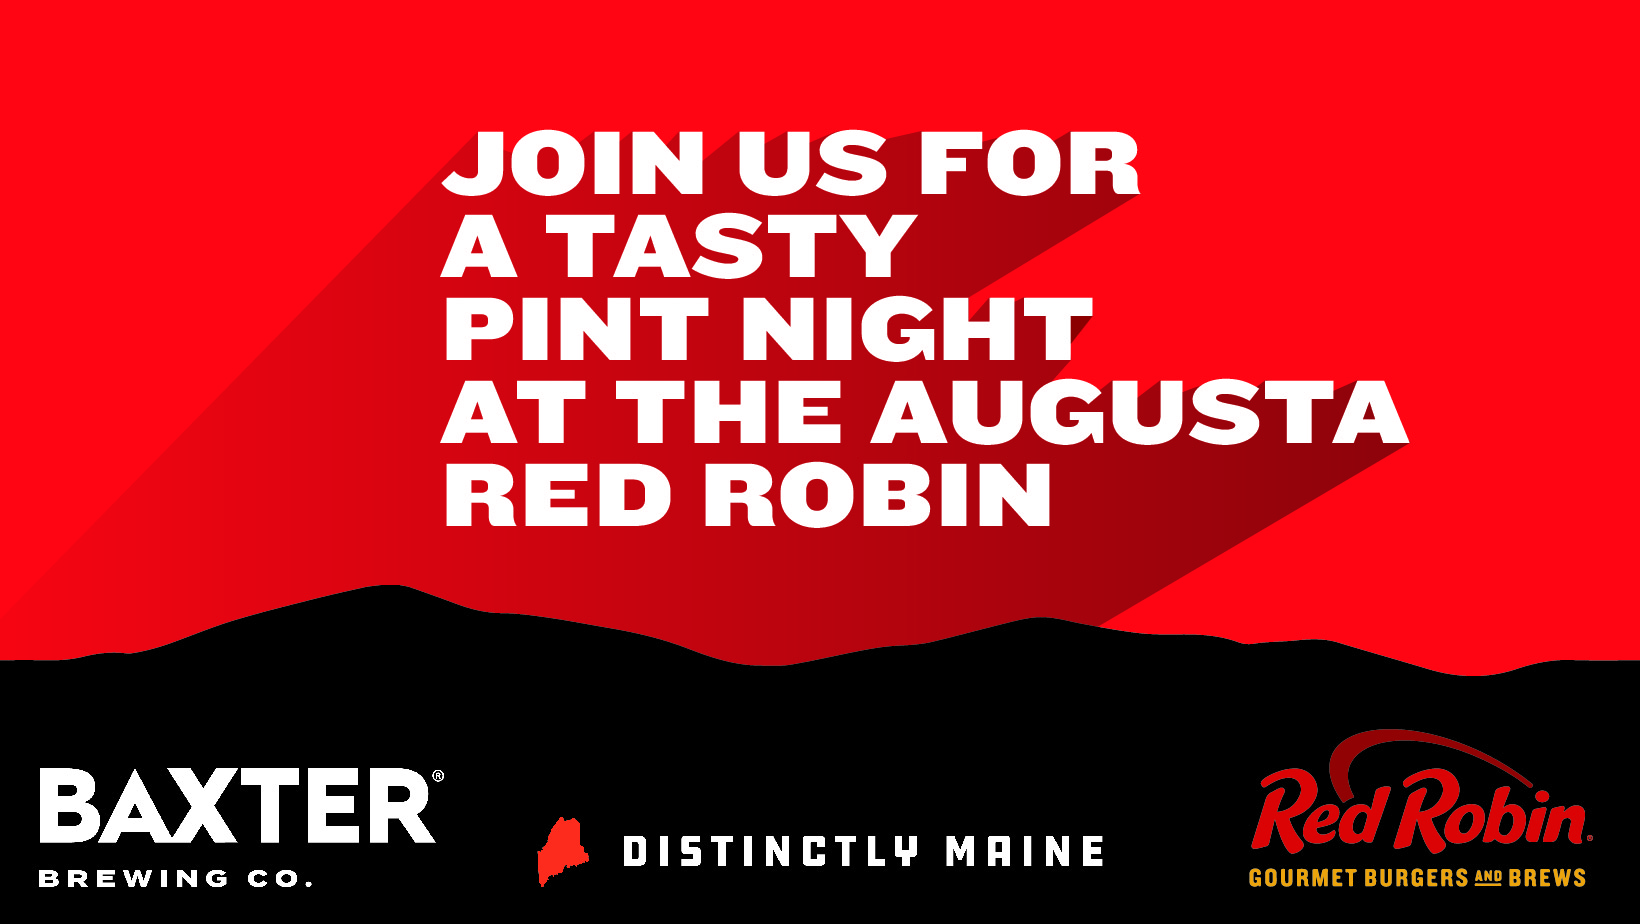 image promoting a pint night at Red Robin in Augusta.